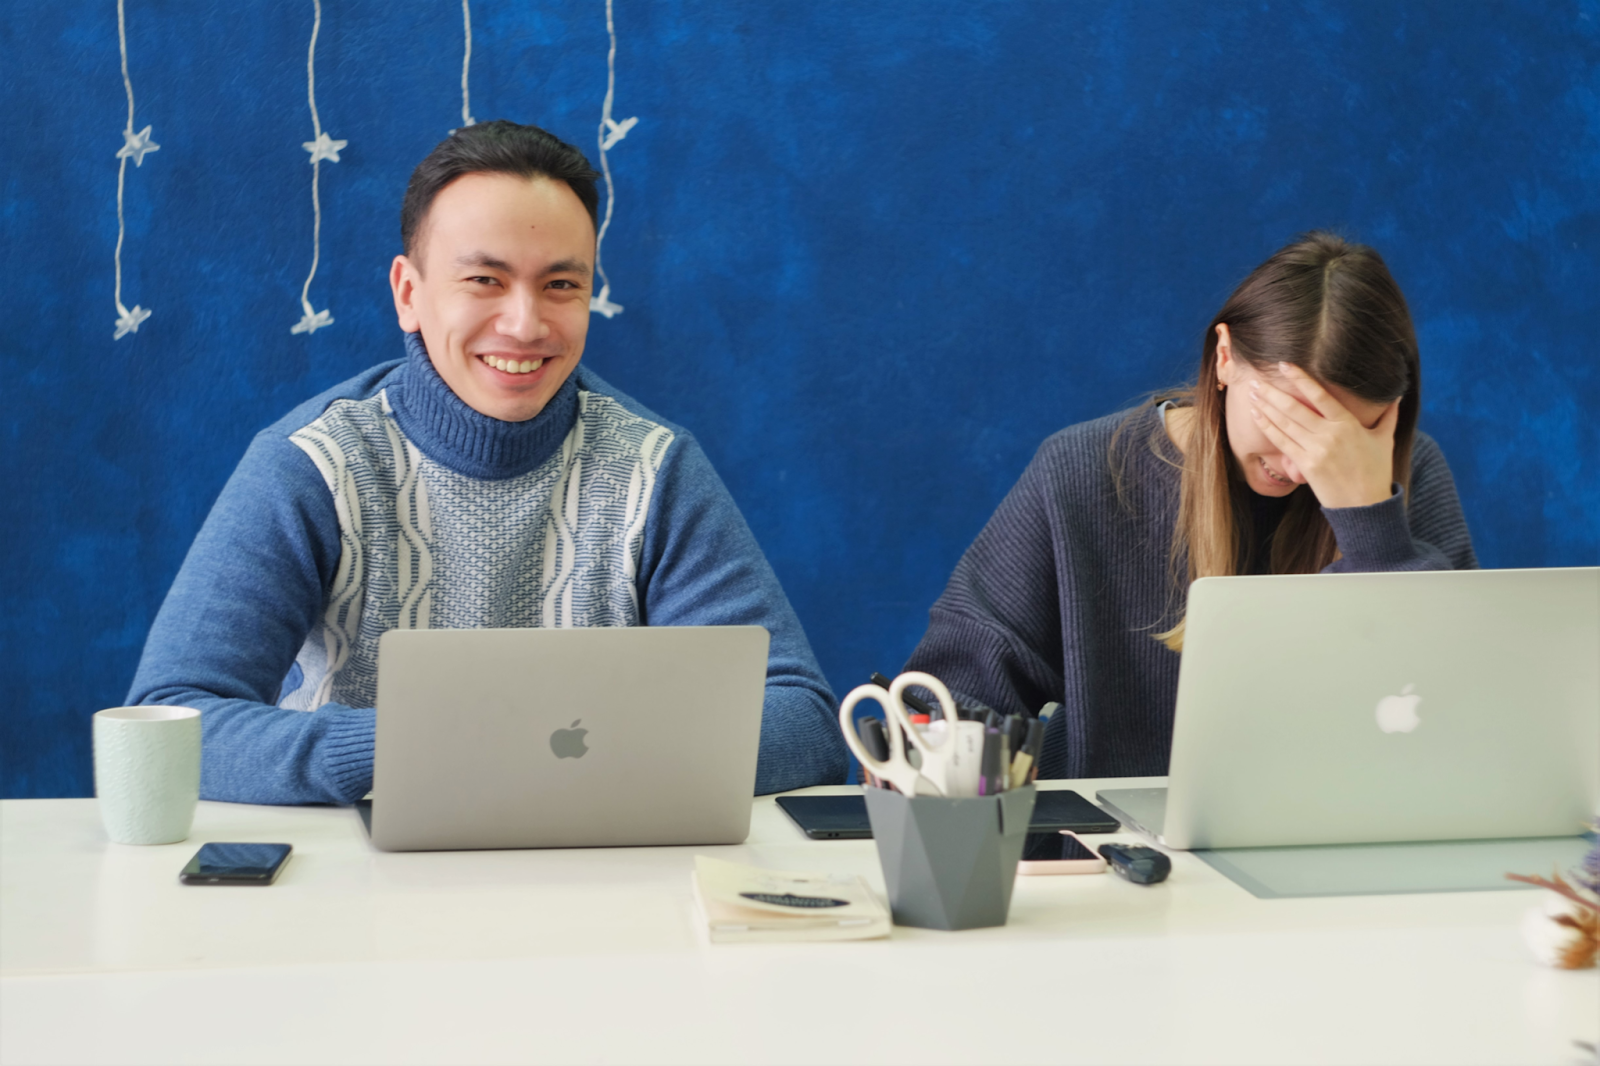 man and woman working on laptop laughing